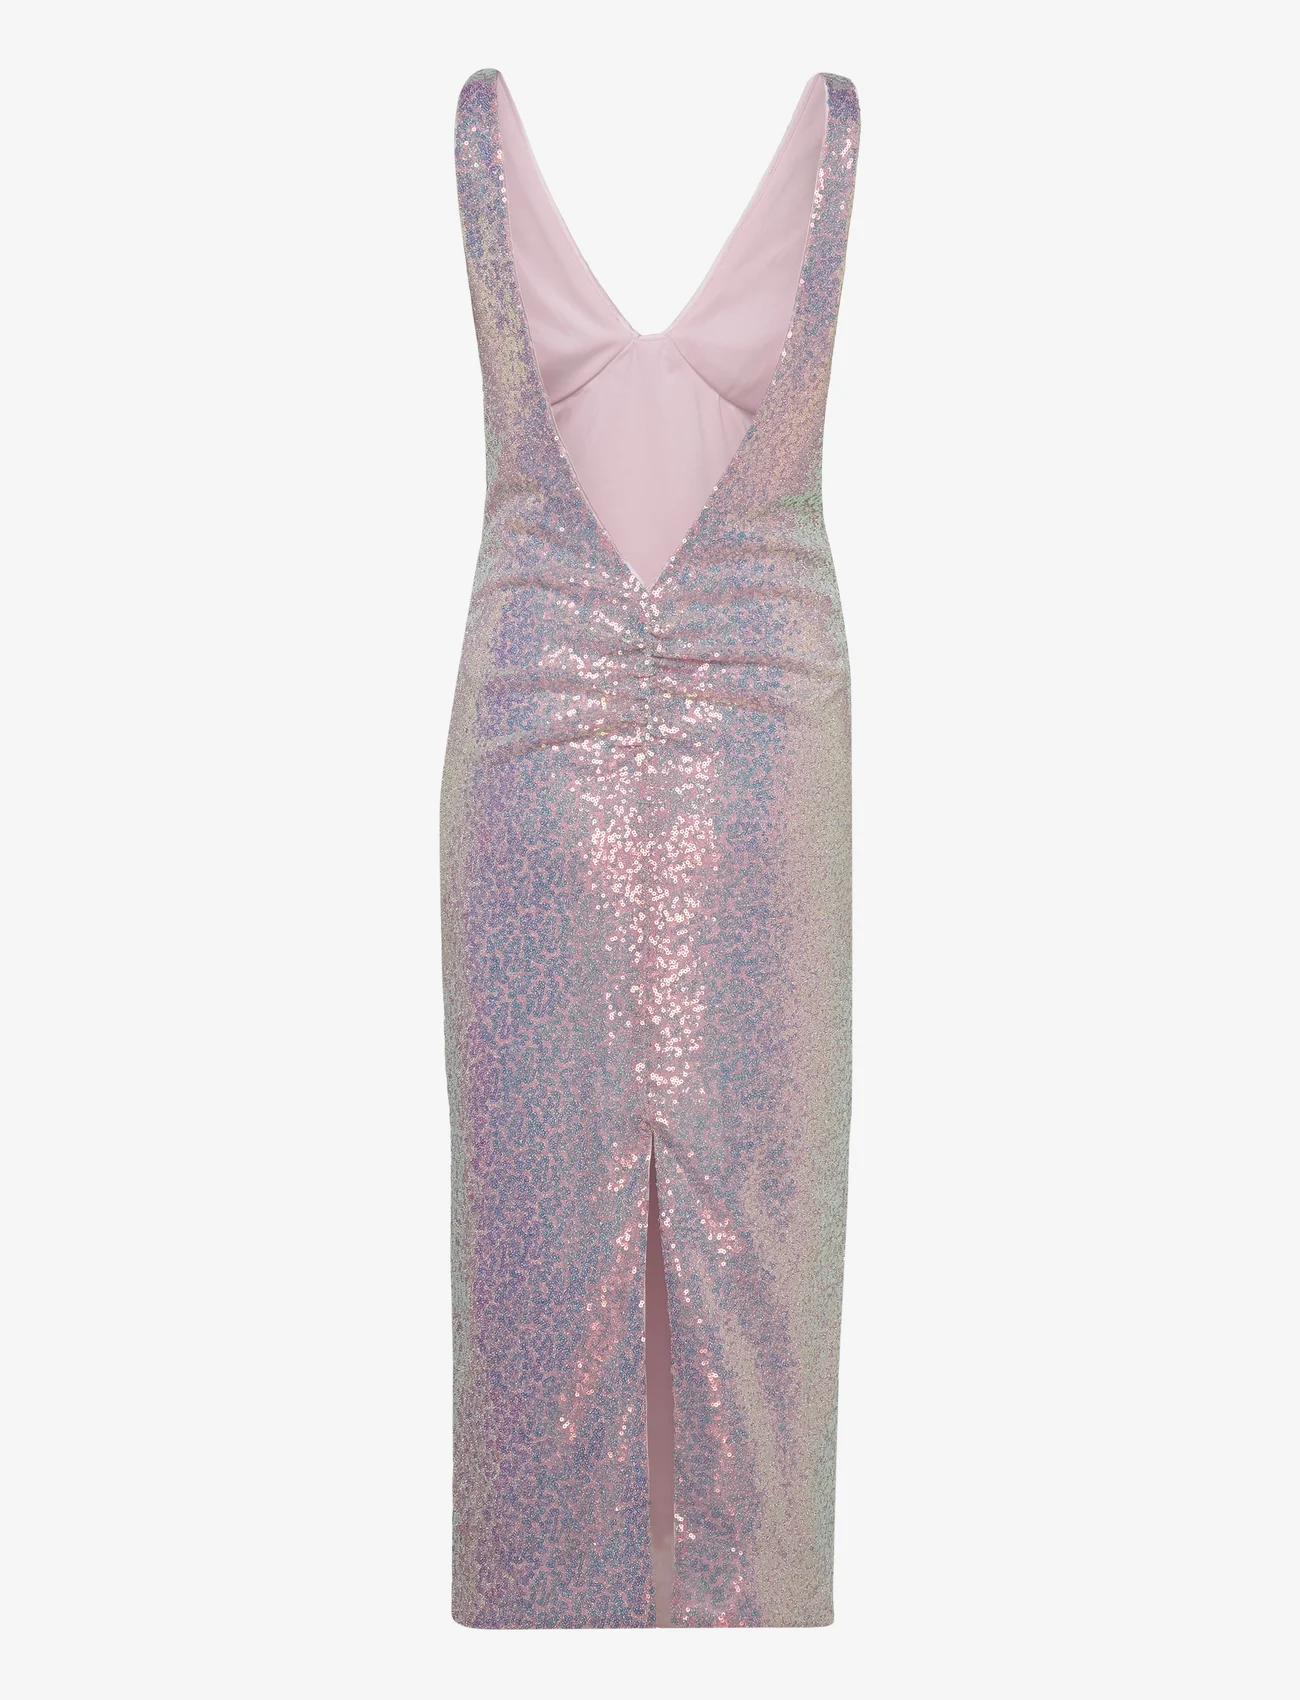 ROTATE Birger Christensen - Sequin Low Cut Back Dress - party wear at outlet prices - sachet pink - 1